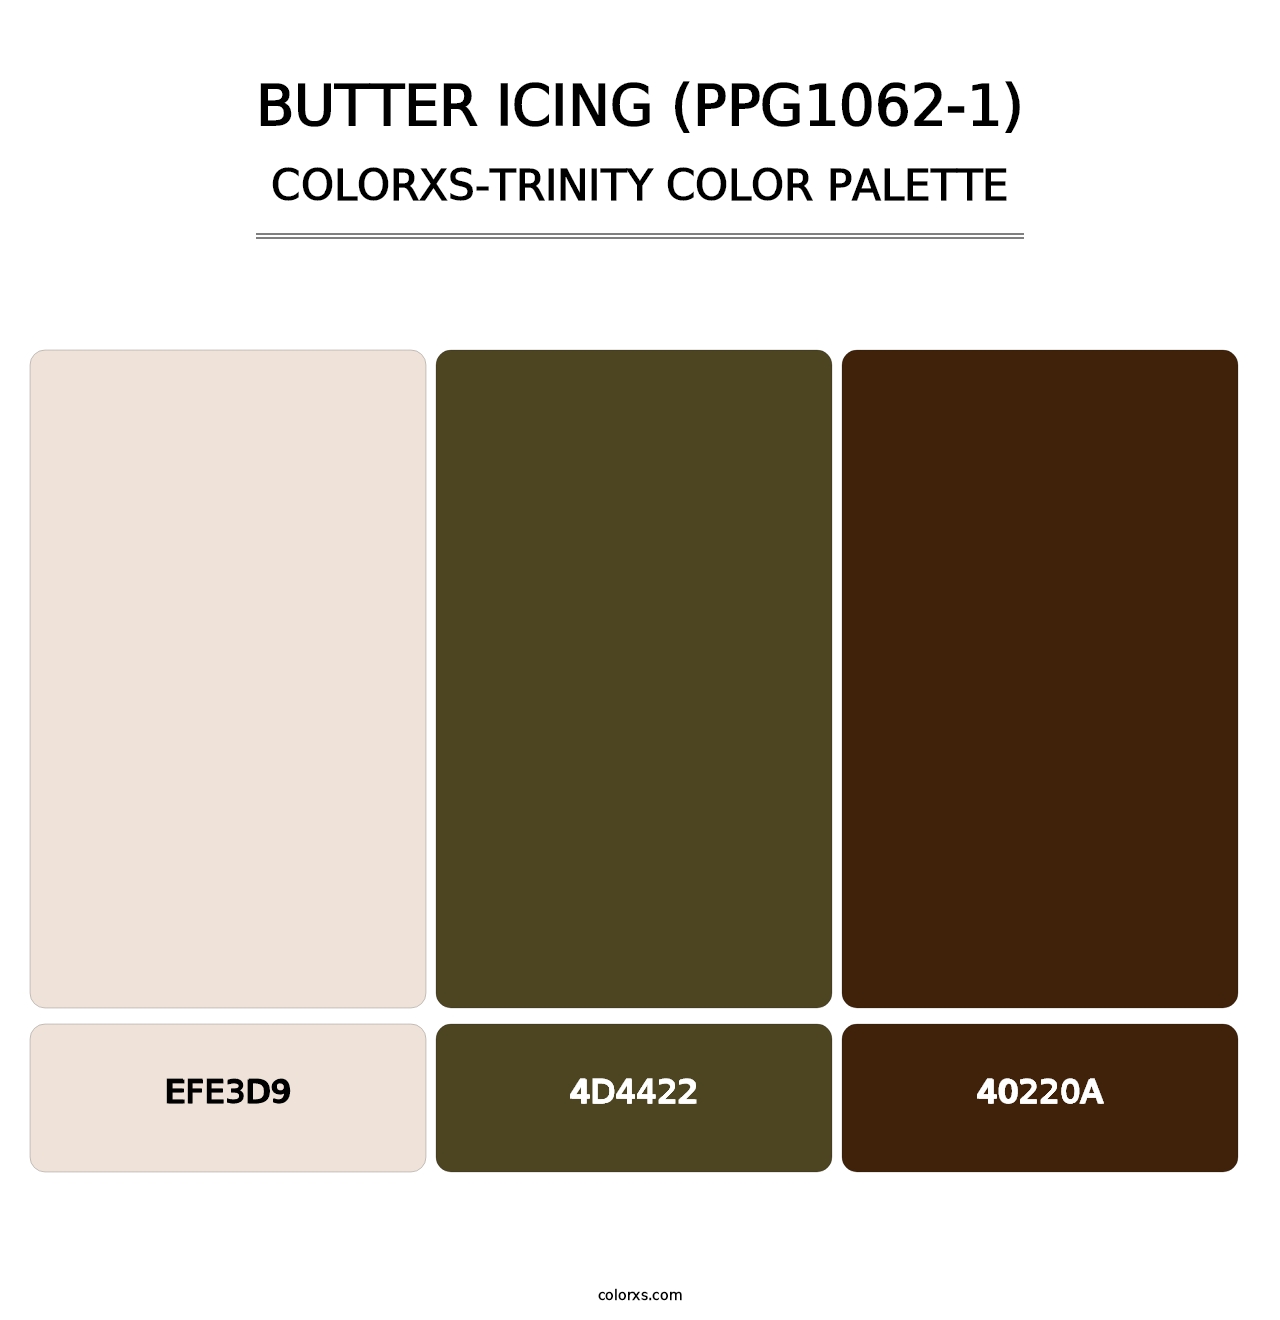 Butter Icing (PPG1062-1) - Colorxs Trinity Palette